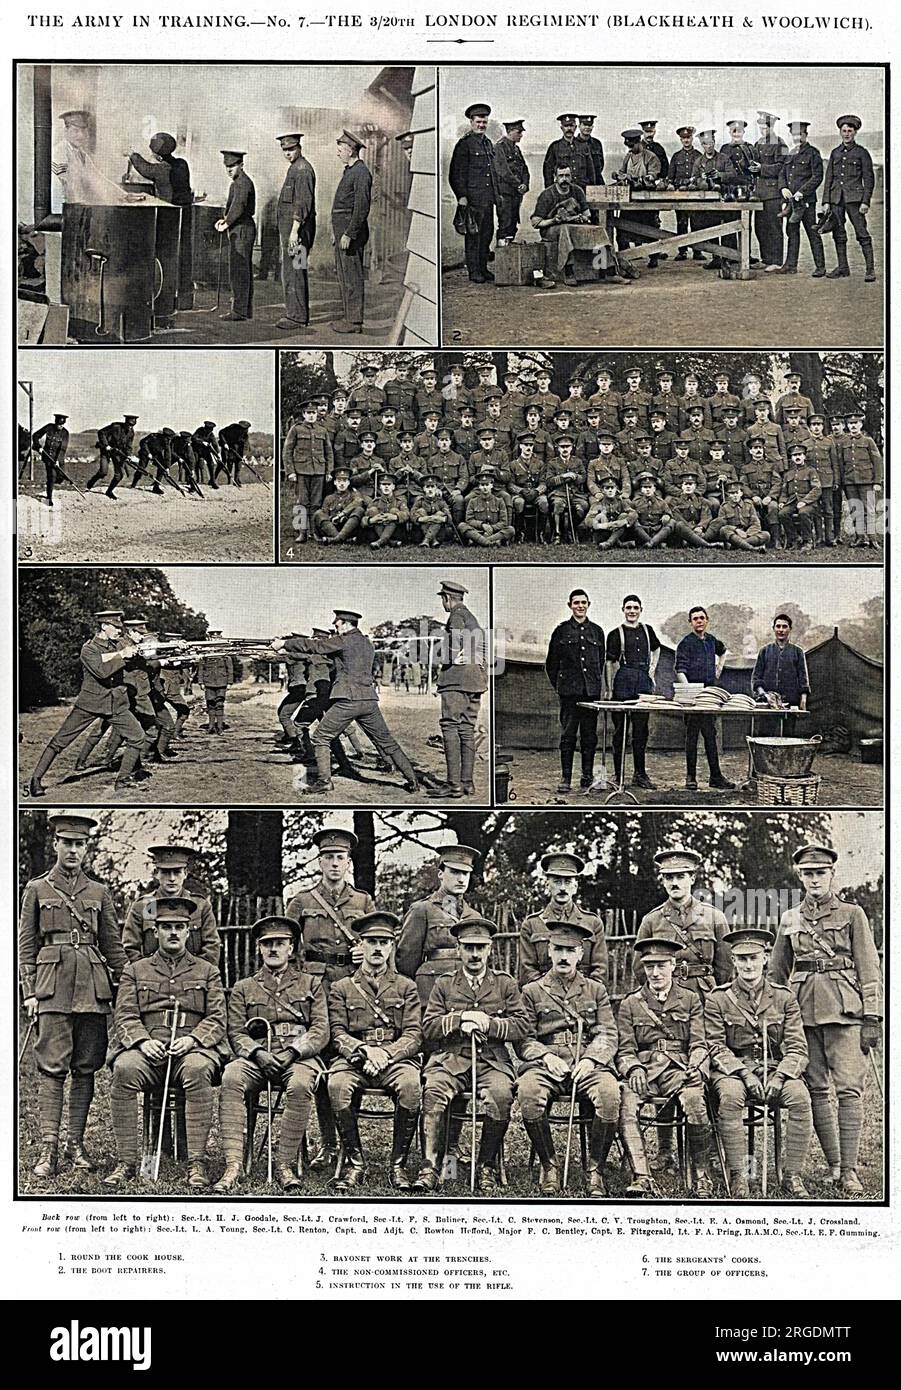 The Army in training, in this instance the 3/20th London Regiment (Blackheath and Woolwich).  1.  Round the cook house, 2, the boot repairers, 3, bayonet practice, 4. non-commissioned officers 5. instruction in the use of the rife, 6. the sergeants' cooks, 7. Group of officers, back row, left to right - Sec.-Lt H. J. Goodale, Sec.Lt. J. Crawford, Sec. Lt. F. S. Buliner, Sec.-Lt. C. Stevenson, Sec. Lt. C. V. Troughton, Sec-Lt. E. A. Osmond, Sec-Lt. J. Crossland.  Front row, left to right, Sec.-Lt. L. A. Young, Sec.-Lt. C. Renton, Capt. and Adjt. C. Rowton Hefford, Major F. C. Bentley, Capt. E. Stock Photo